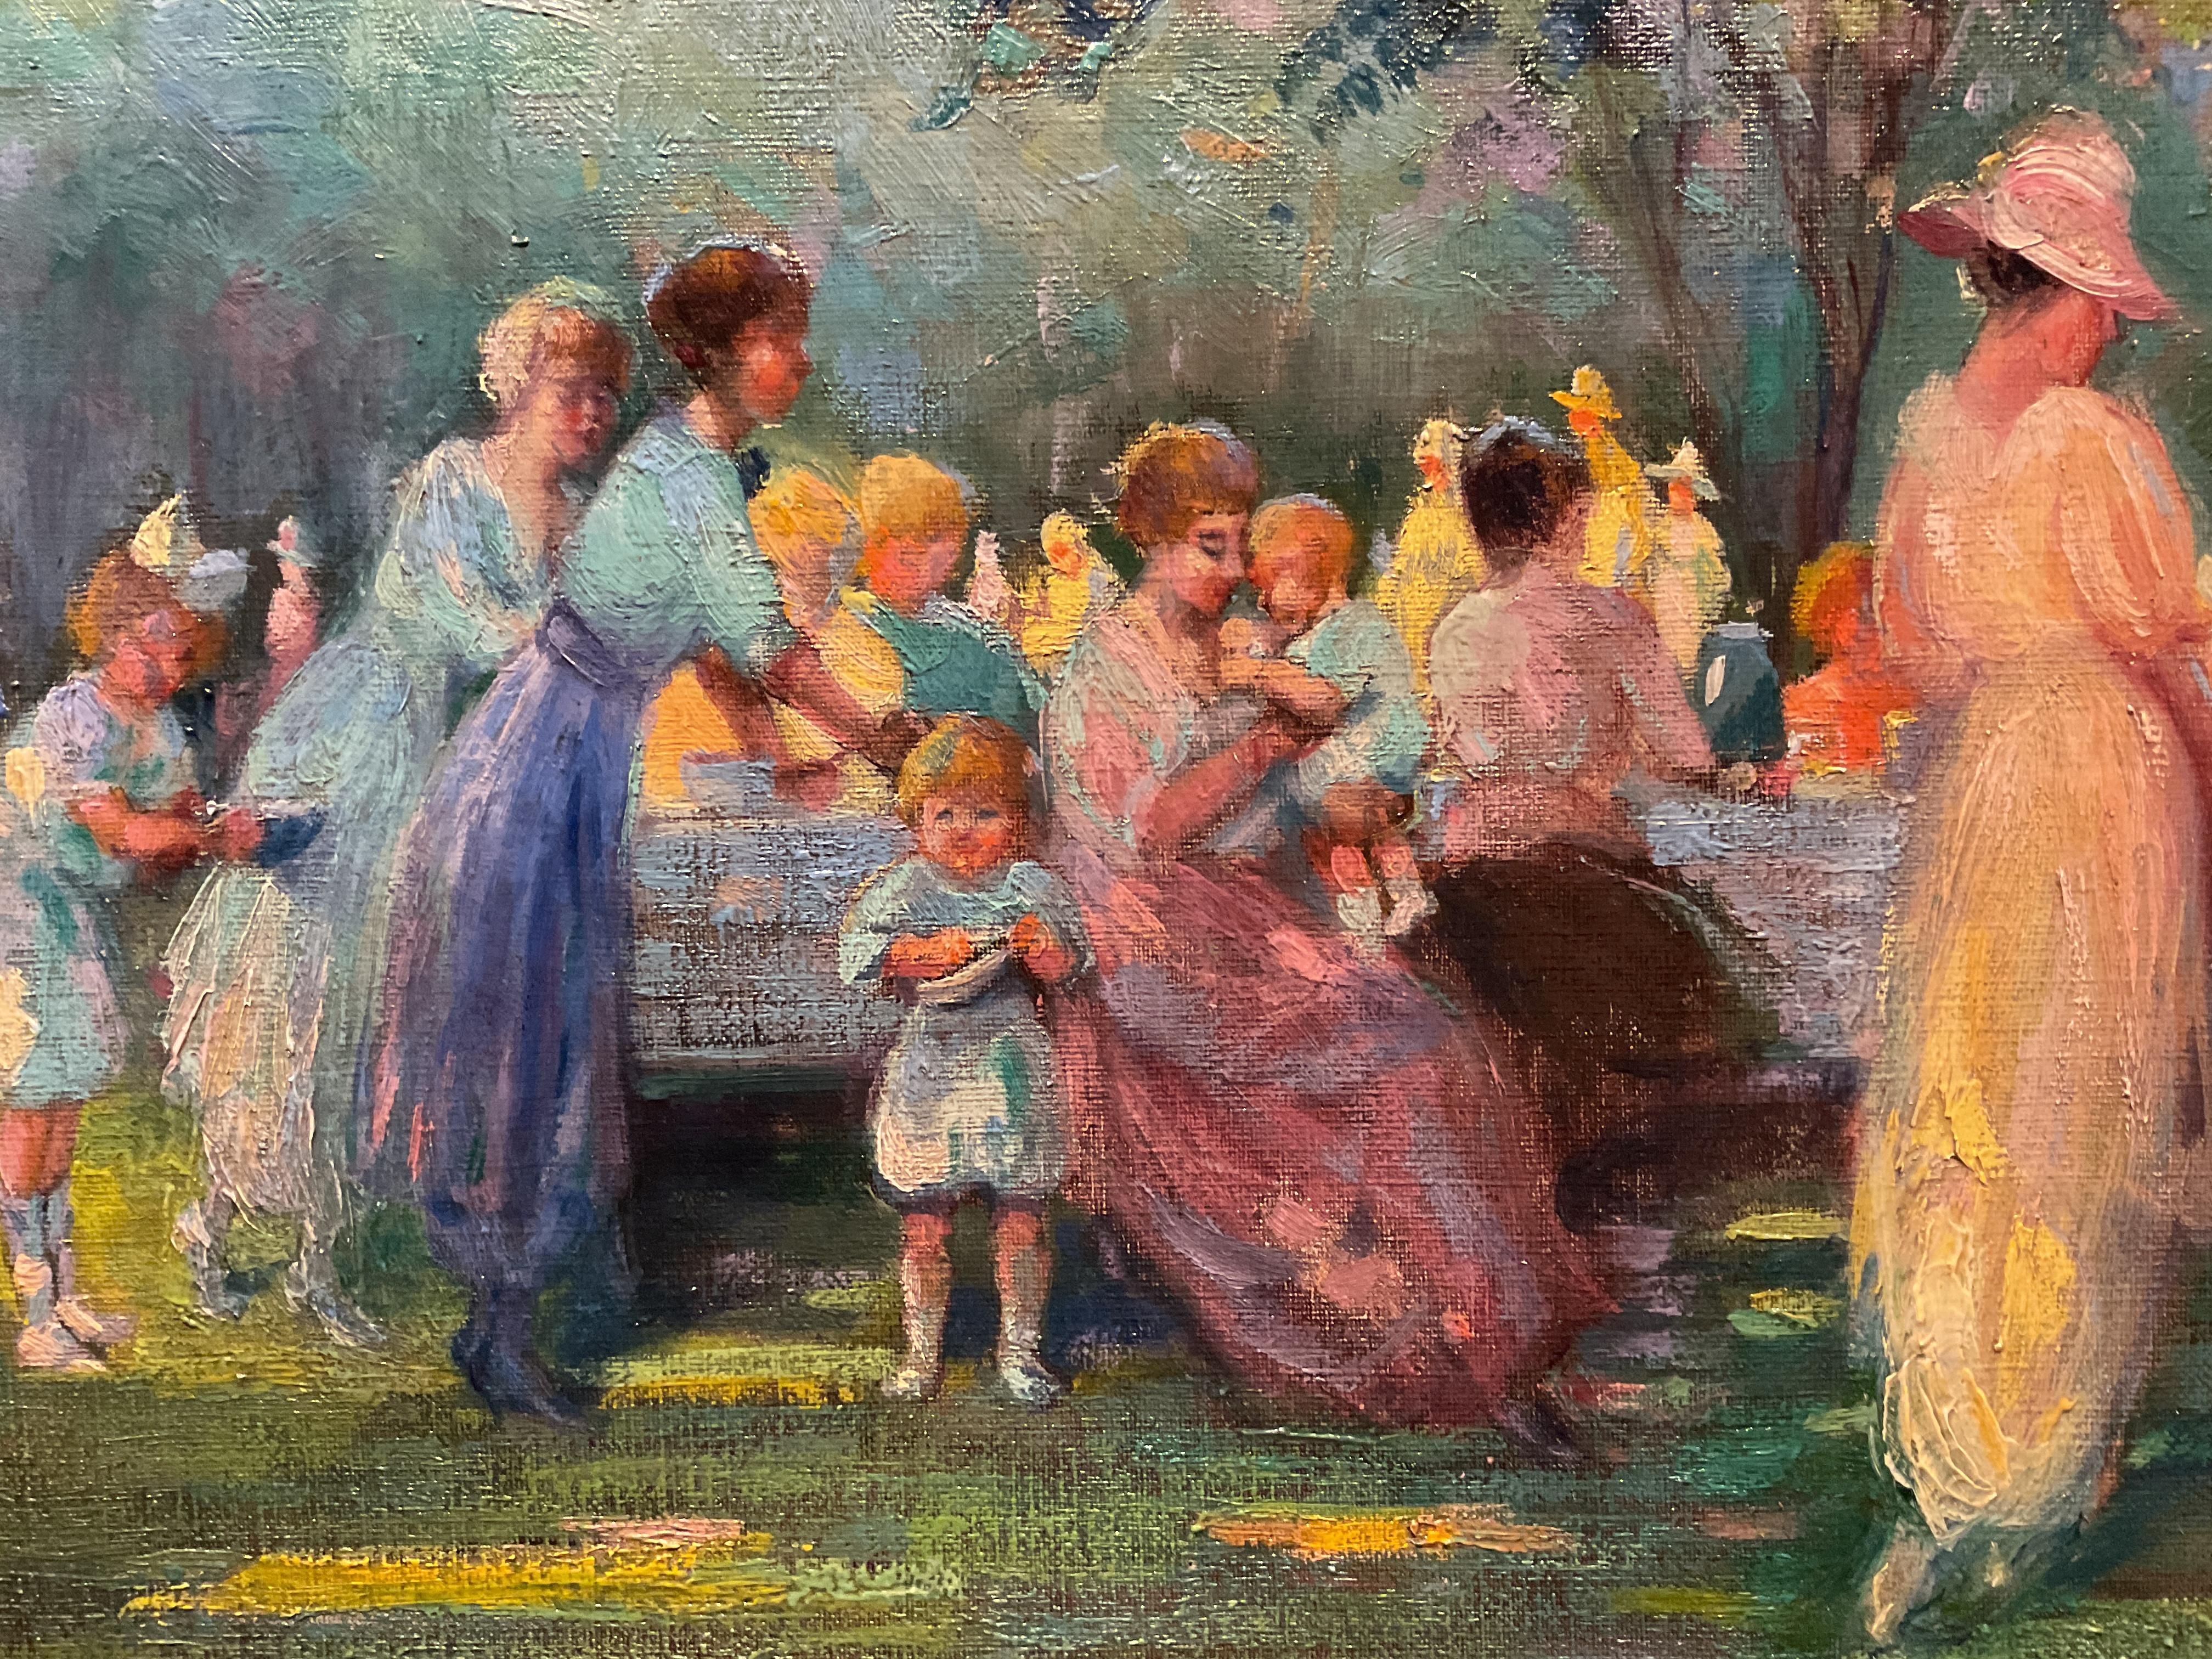 Fine Impressionist American School Oil on Canvas; Family Picnic or Outing, 1925 - American Impressionist Painting by Unknown